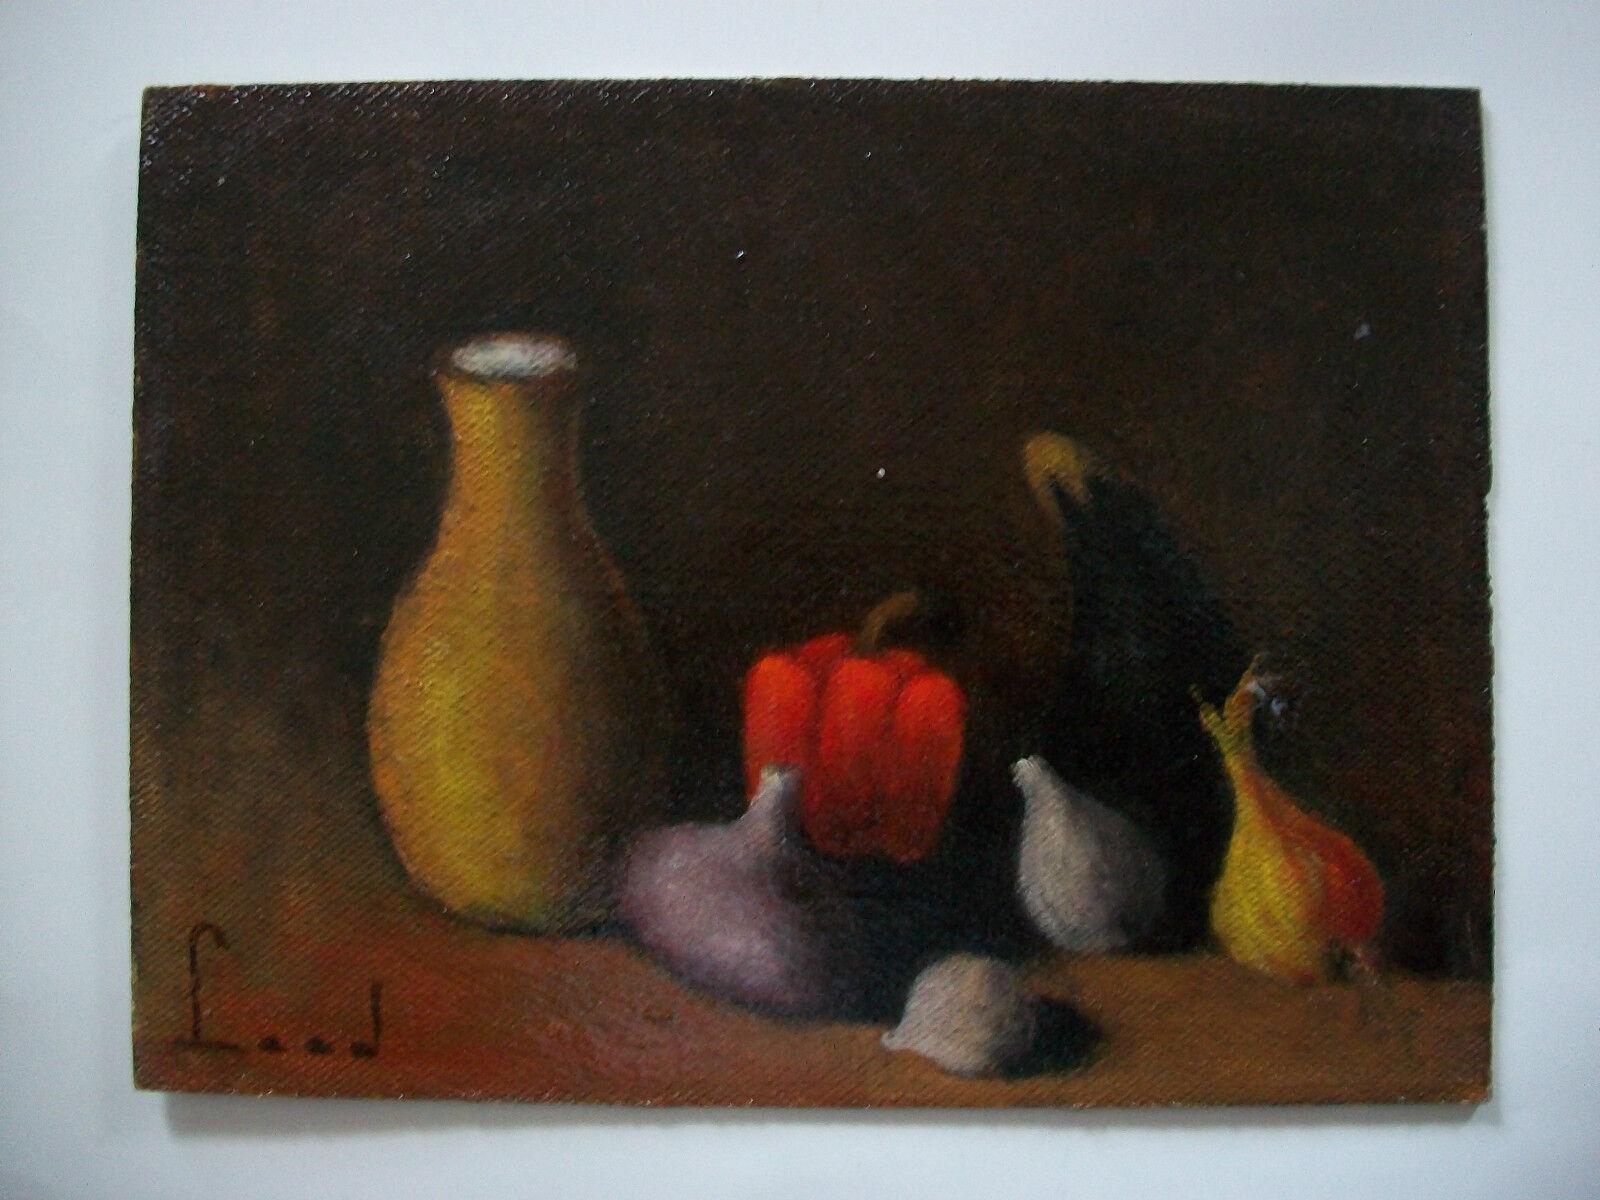 WALTER LOOD - Vintage still life oil painting on primed Masonite panel - signed lower left - unframed - Canada - circa 1970's.

Excellent vintage condition - no loss - no damage - no restoration - minor scuffs to the heavy gloss varnish - ready to